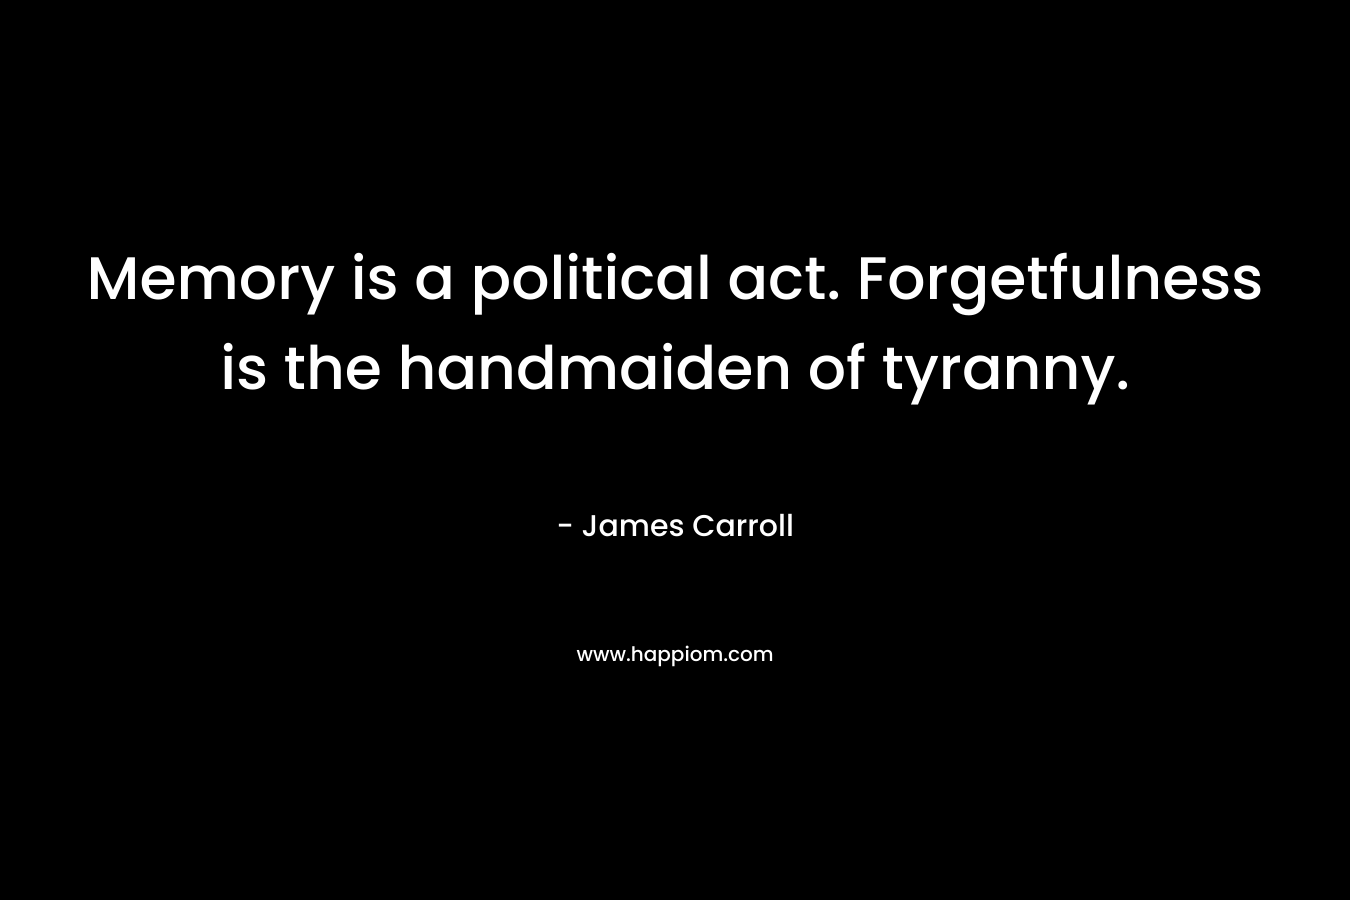 Memory is a political act. Forgetfulness is the handmaiden of tyranny. – James Carroll